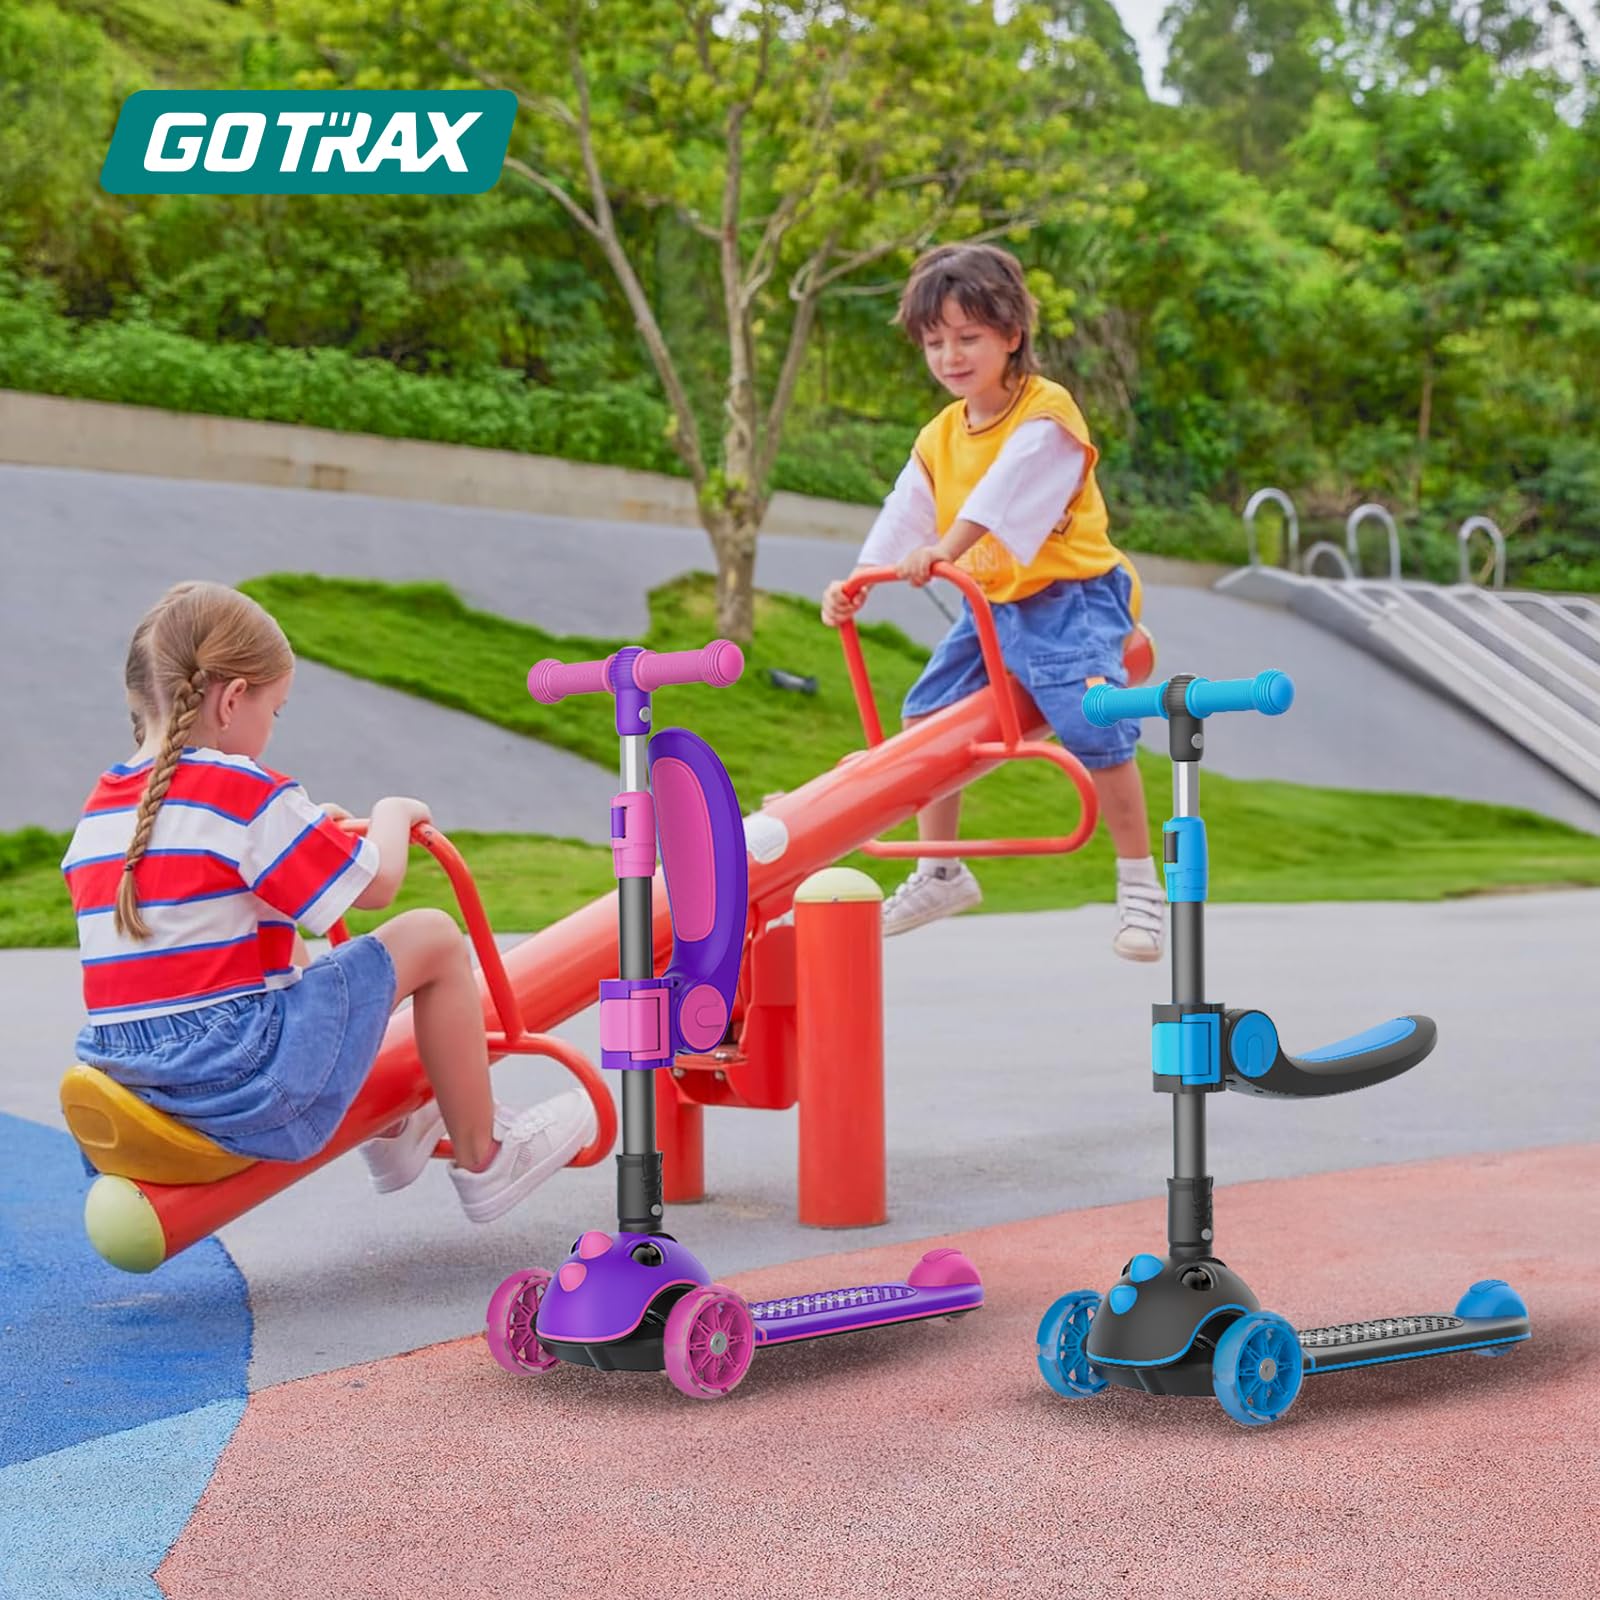 Gotrax KS3 Pro Kick Scooter for Kids, One Key Removable Seat & 3 Extra Wide PU Light-Up Wheels and Anti-Slip Deck, Adjustable Height Handlebar and Lean-to-Steer, Foldable Scooter for Children Aged 2-8